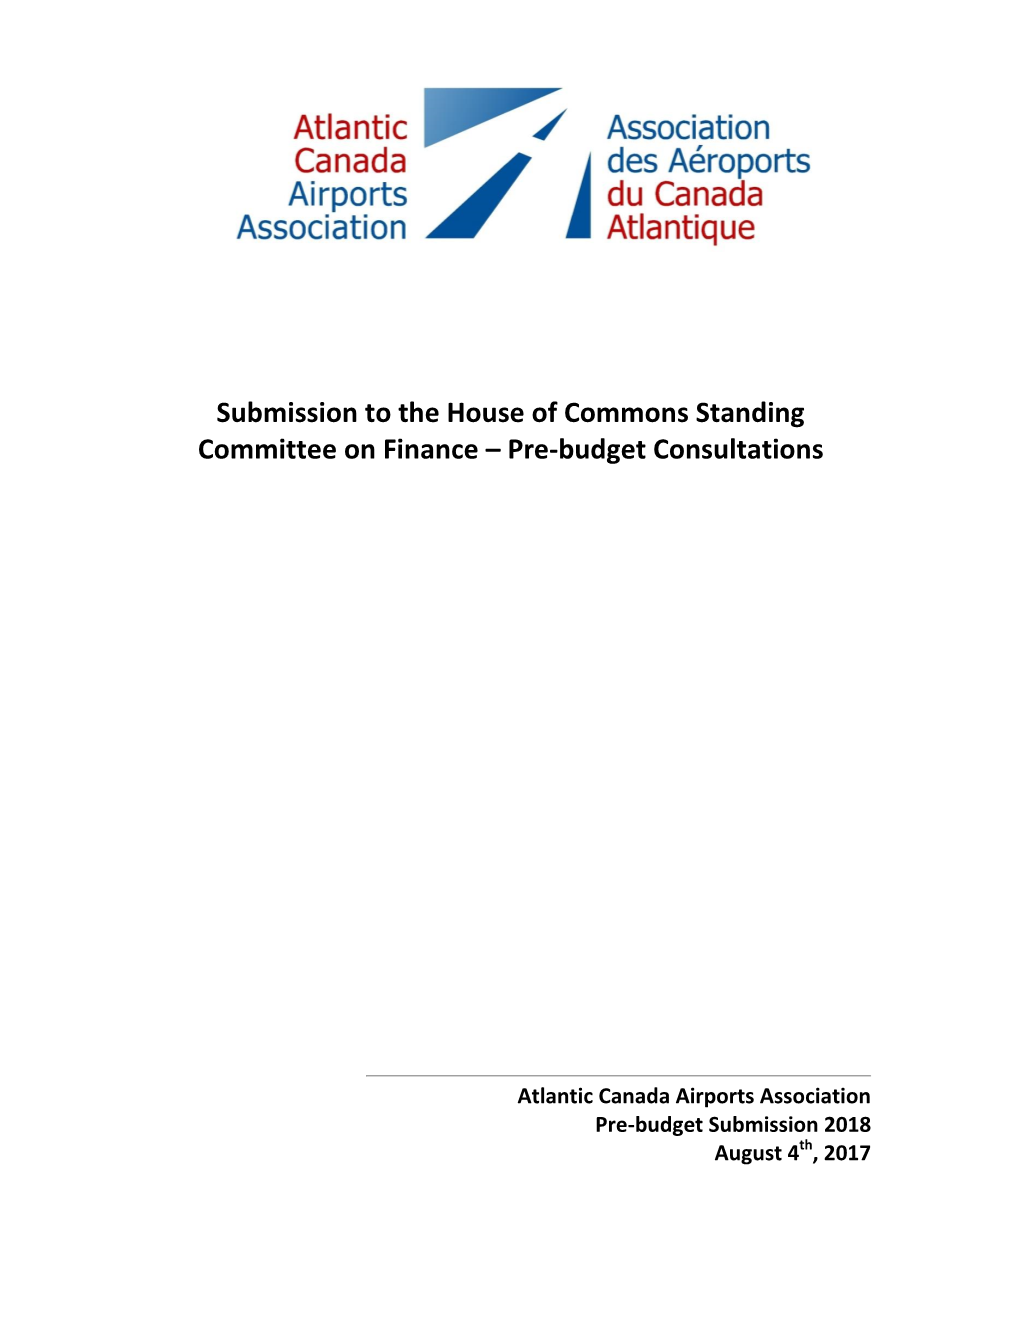 Atlantic Canada Airports Association Pre-Budget Submission 2018 August 4Th, 2017 Submission to the Standing Committee on Finance